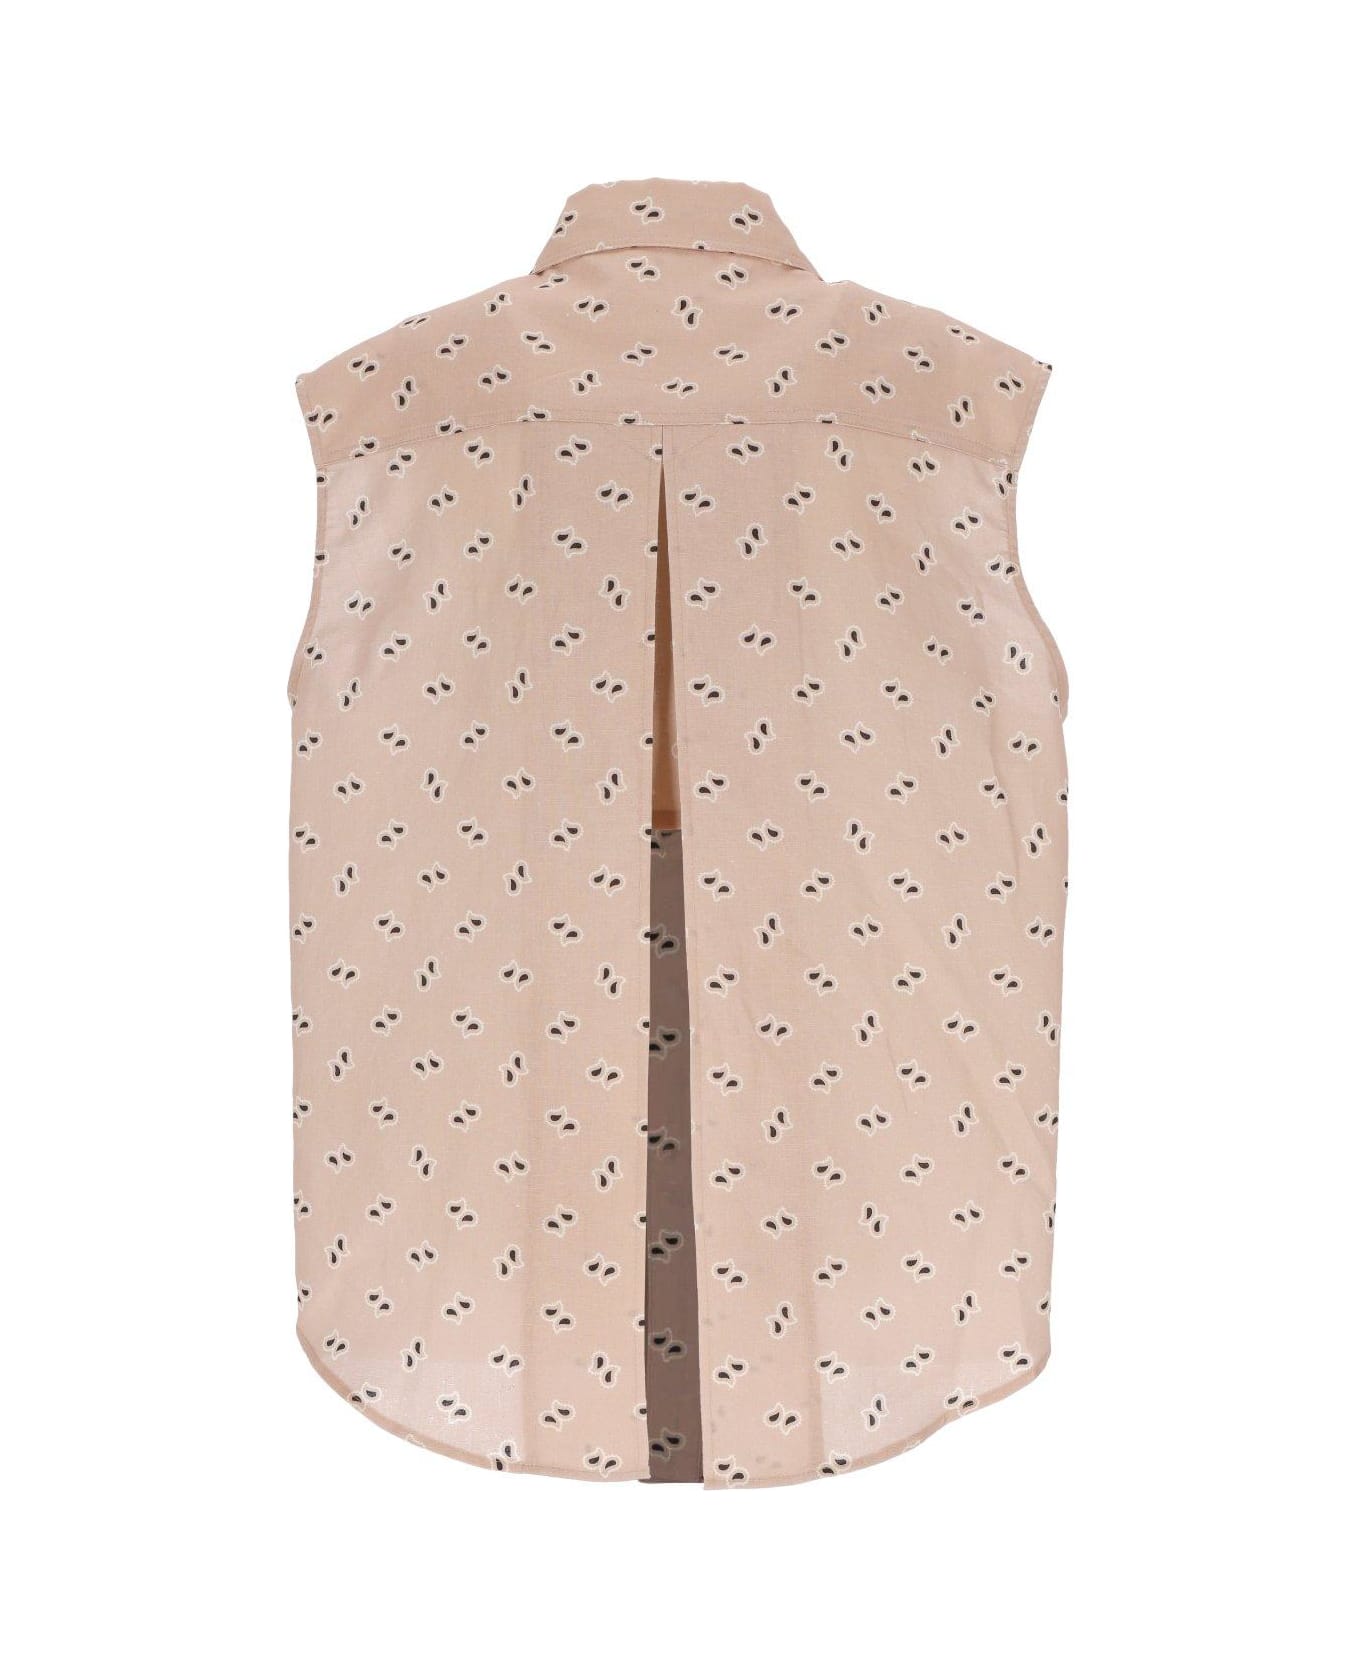 Palm Angels All-over Patterned Sleeveless Top - pink トップス